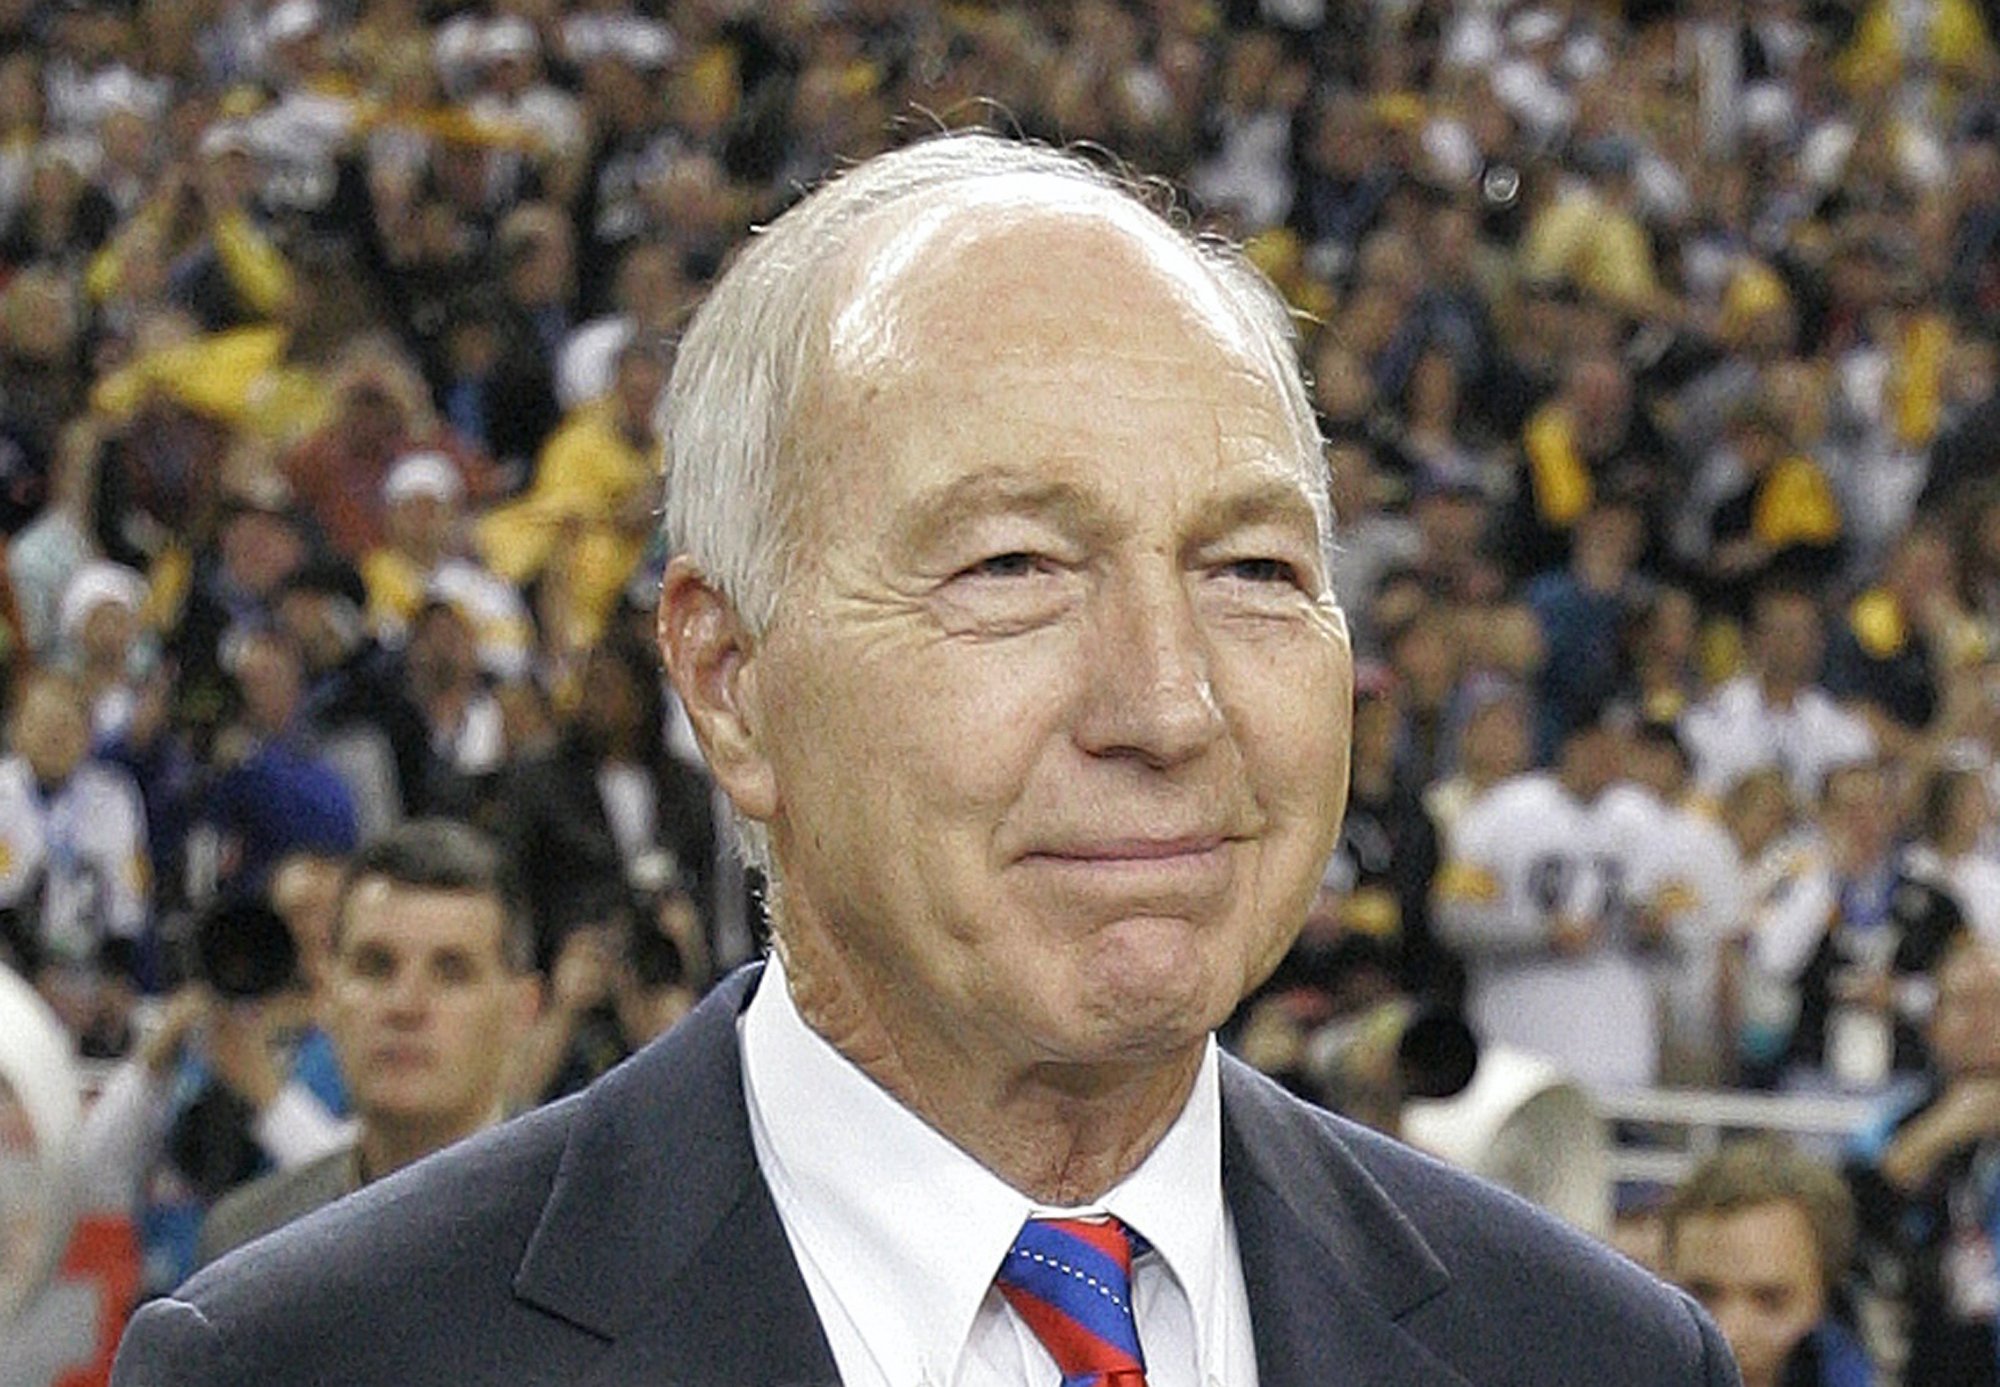 Public service planned for Bart Starr in native Alabama